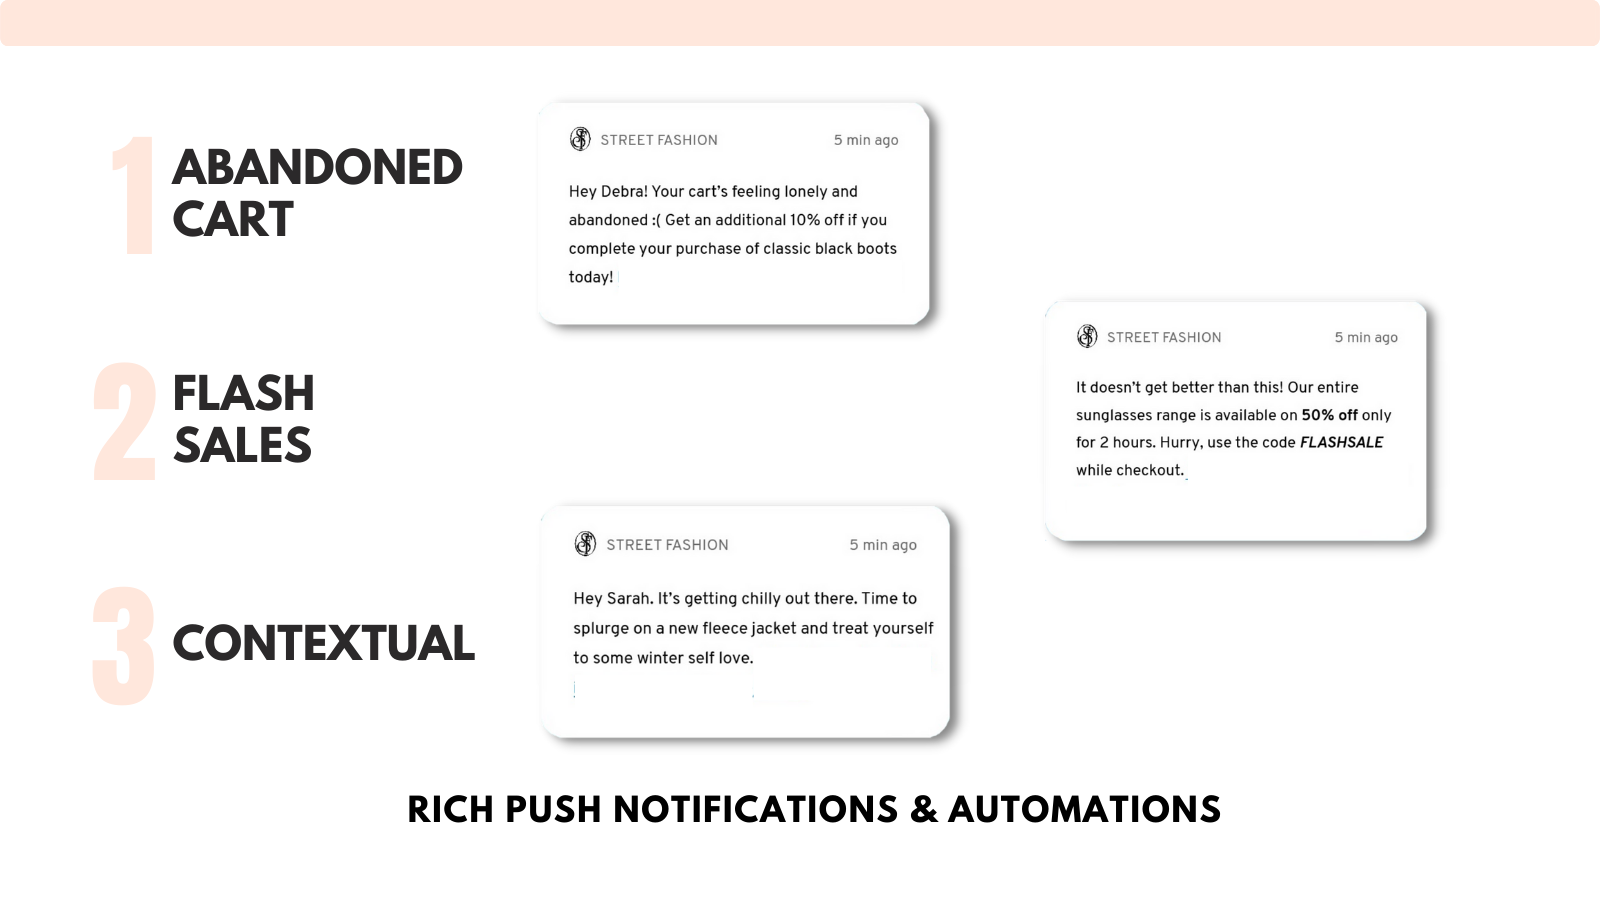 Rich push notifications and automations